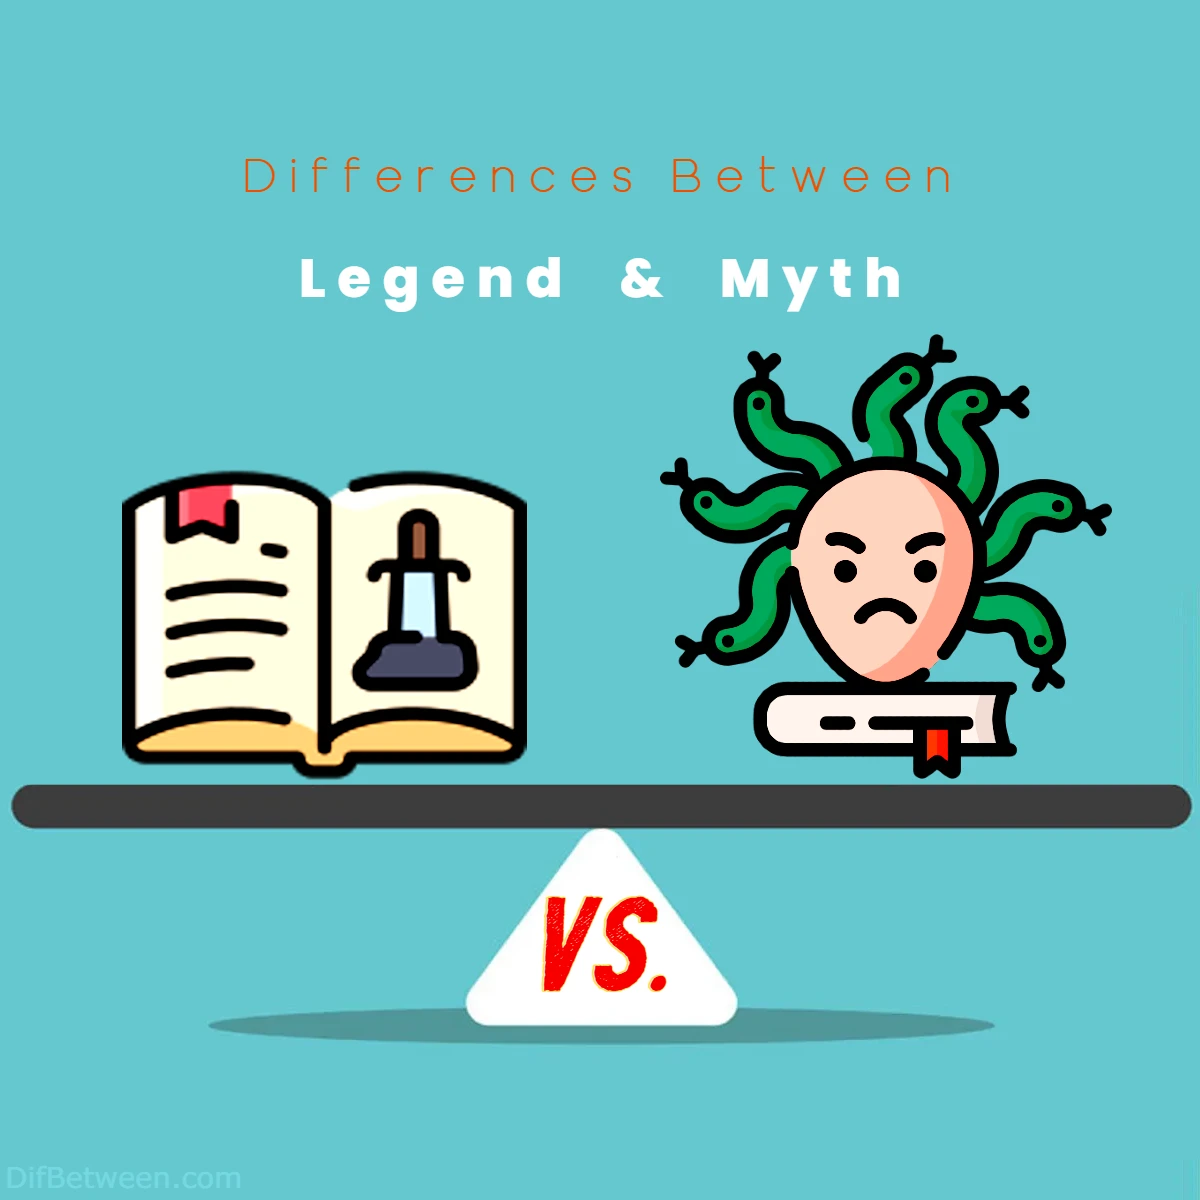 Differences Between Legend vs Myth